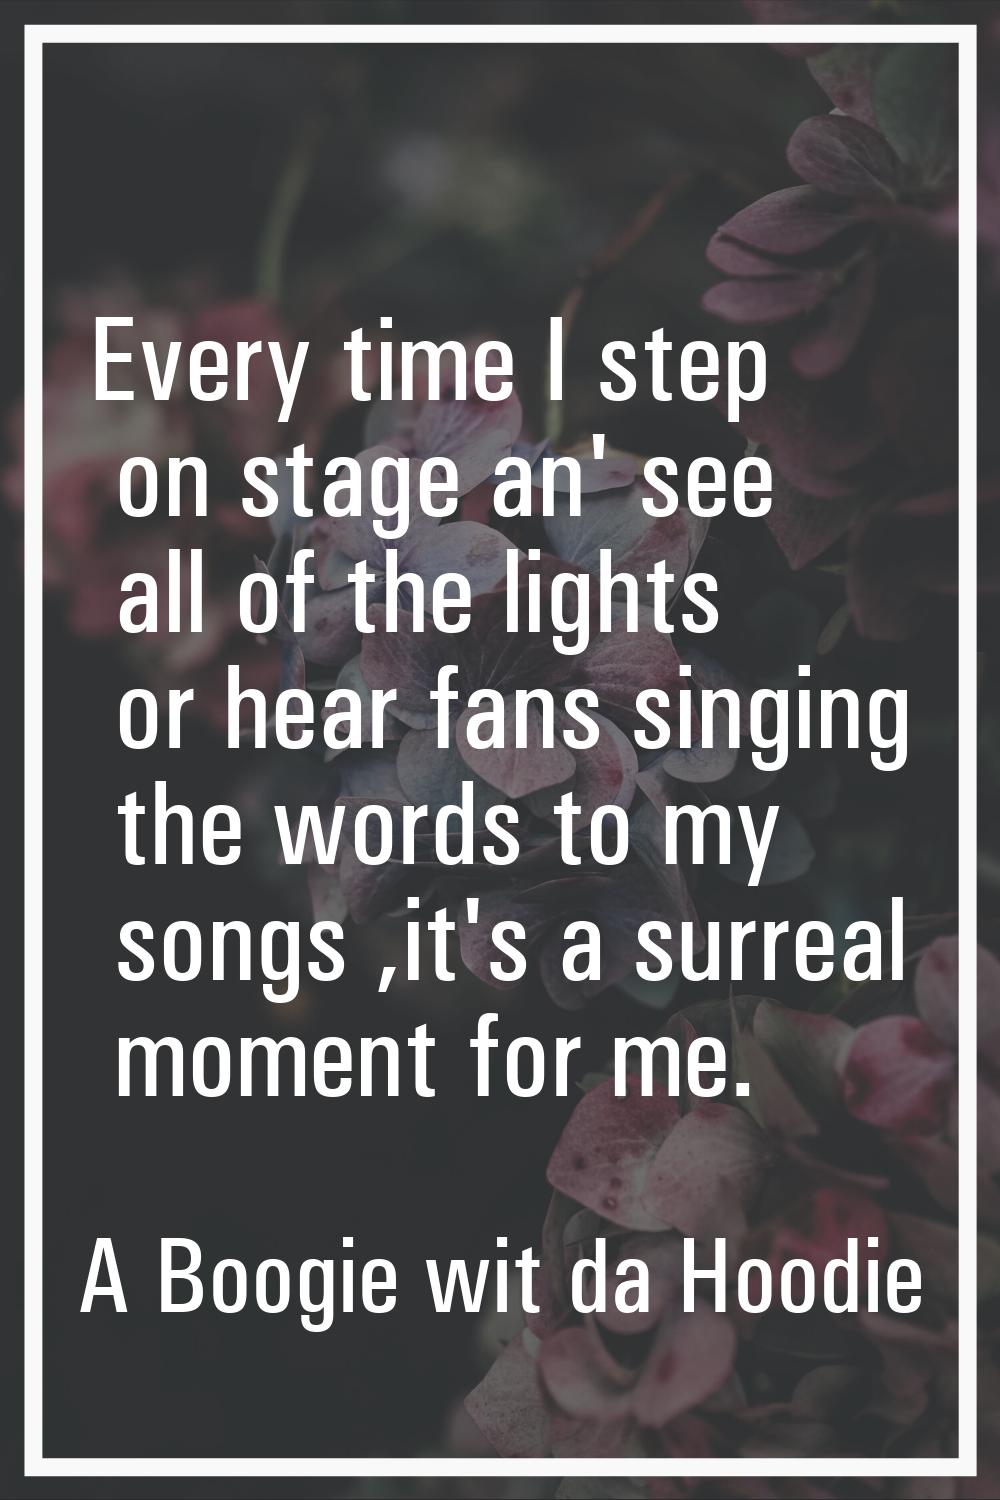 Every time I step on stage an' see all of the lights or hear fans singing the words to my songs ,it